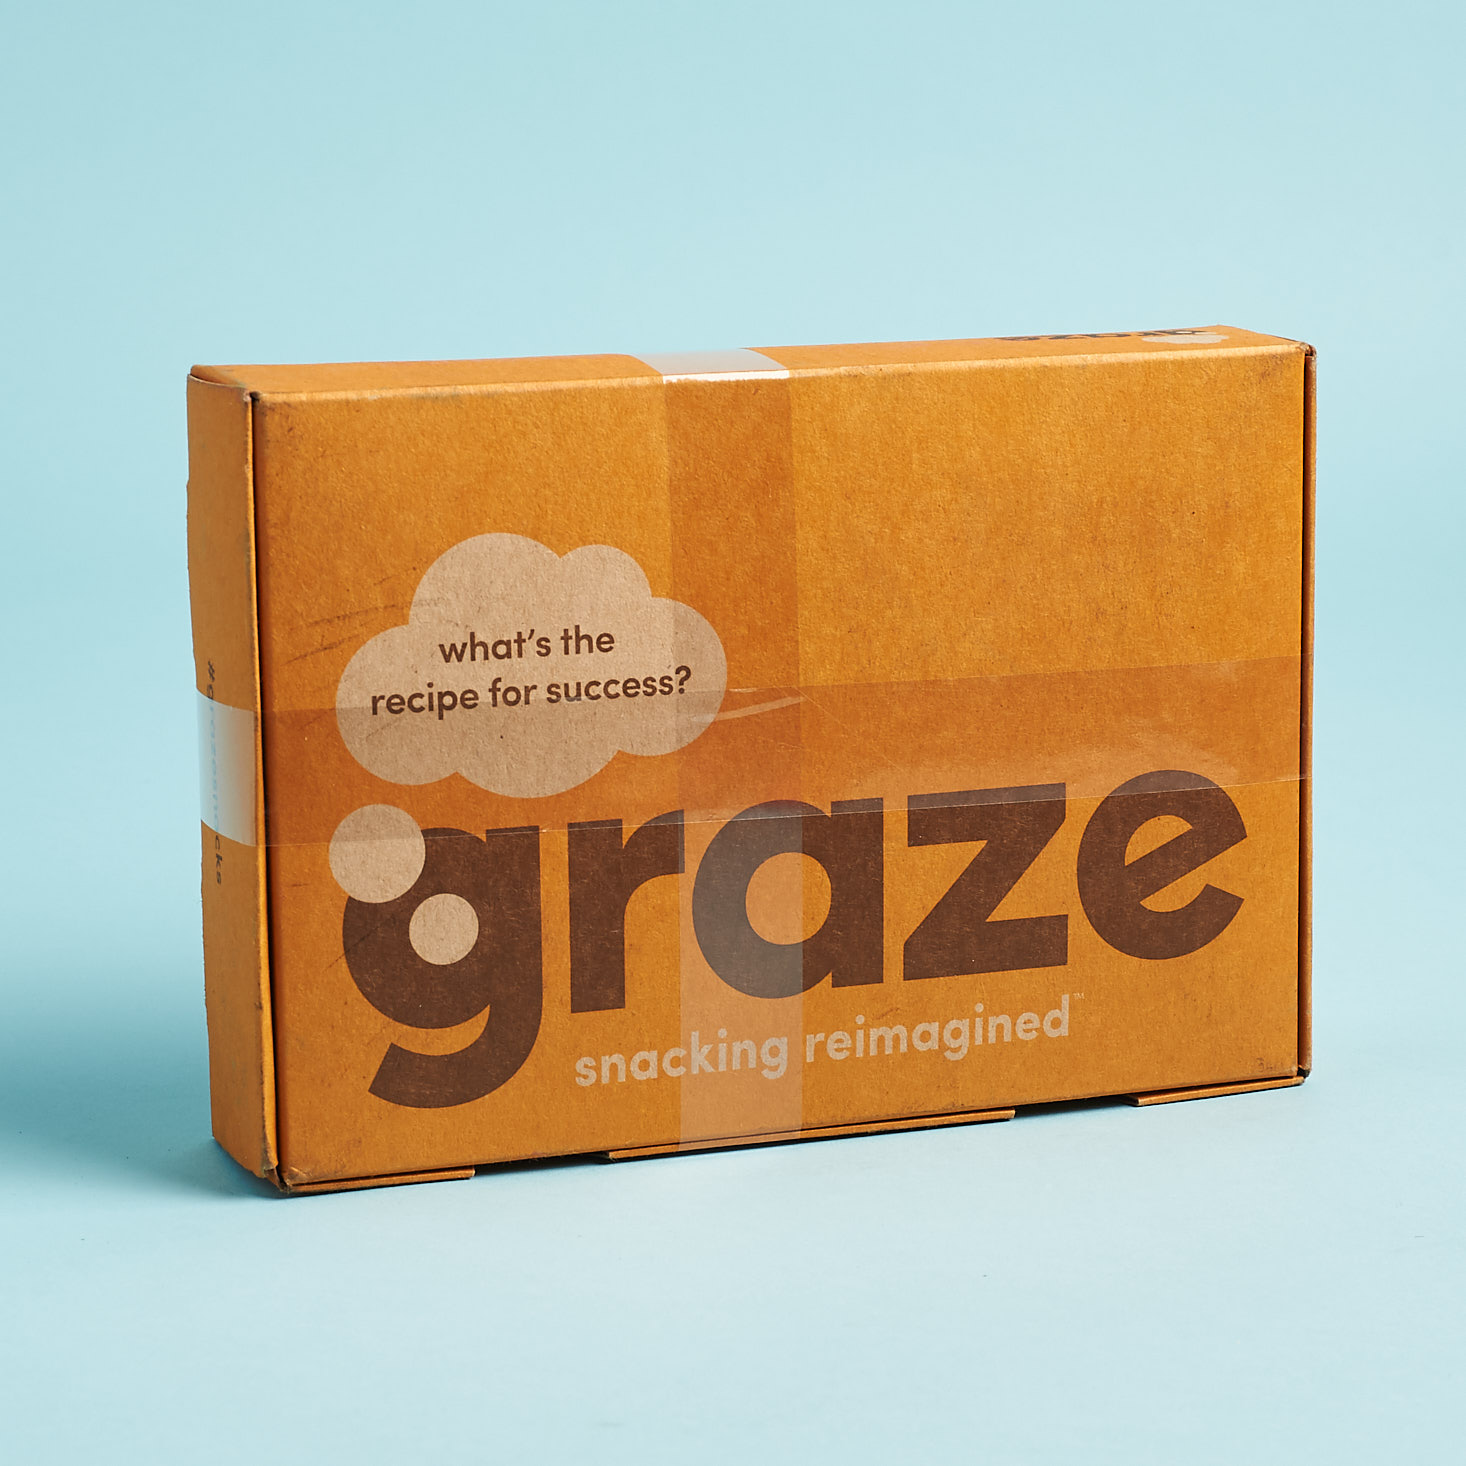 Graze 8 Snack Variety Box Review #2 + Free Box Coupon – June 2018